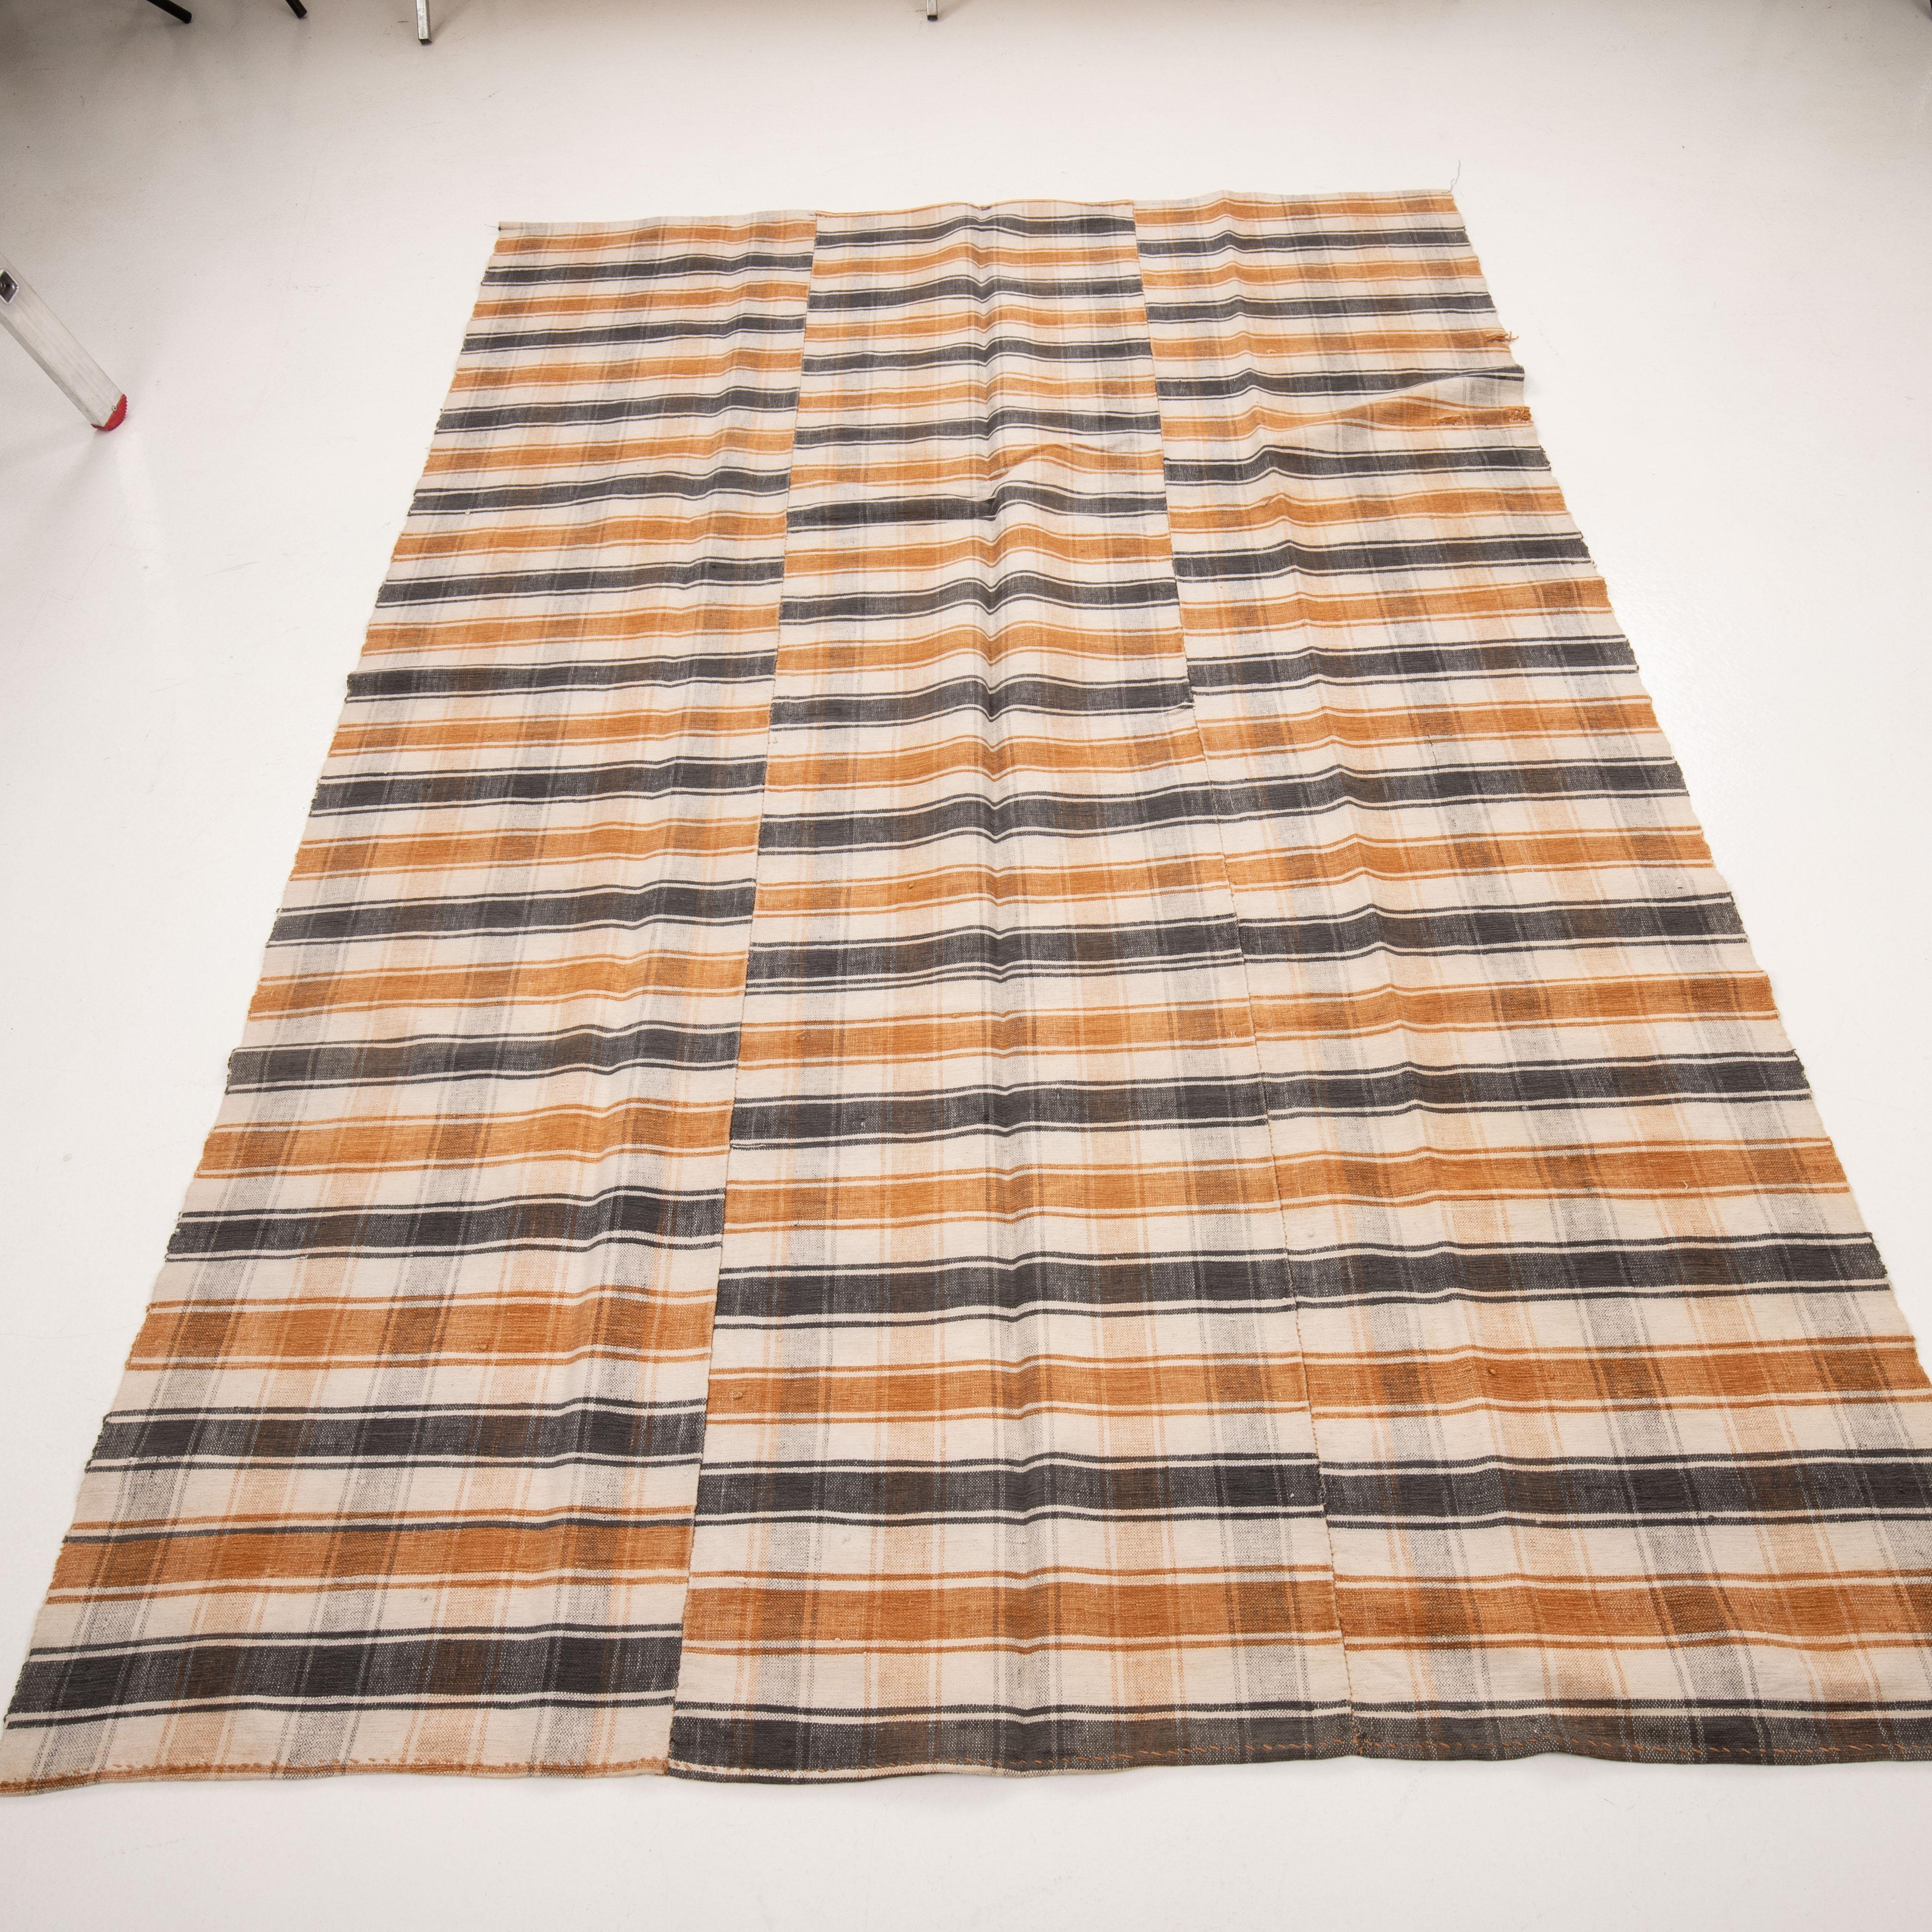 Namals are simple, plain, hand woven covers from Adana Region of Turkey.
It is cotton and used simply for utilitarian purposes to dry grains or cover beddings, or divans etc.
They are not as thick as a kilim so they can mainly be used as covers,